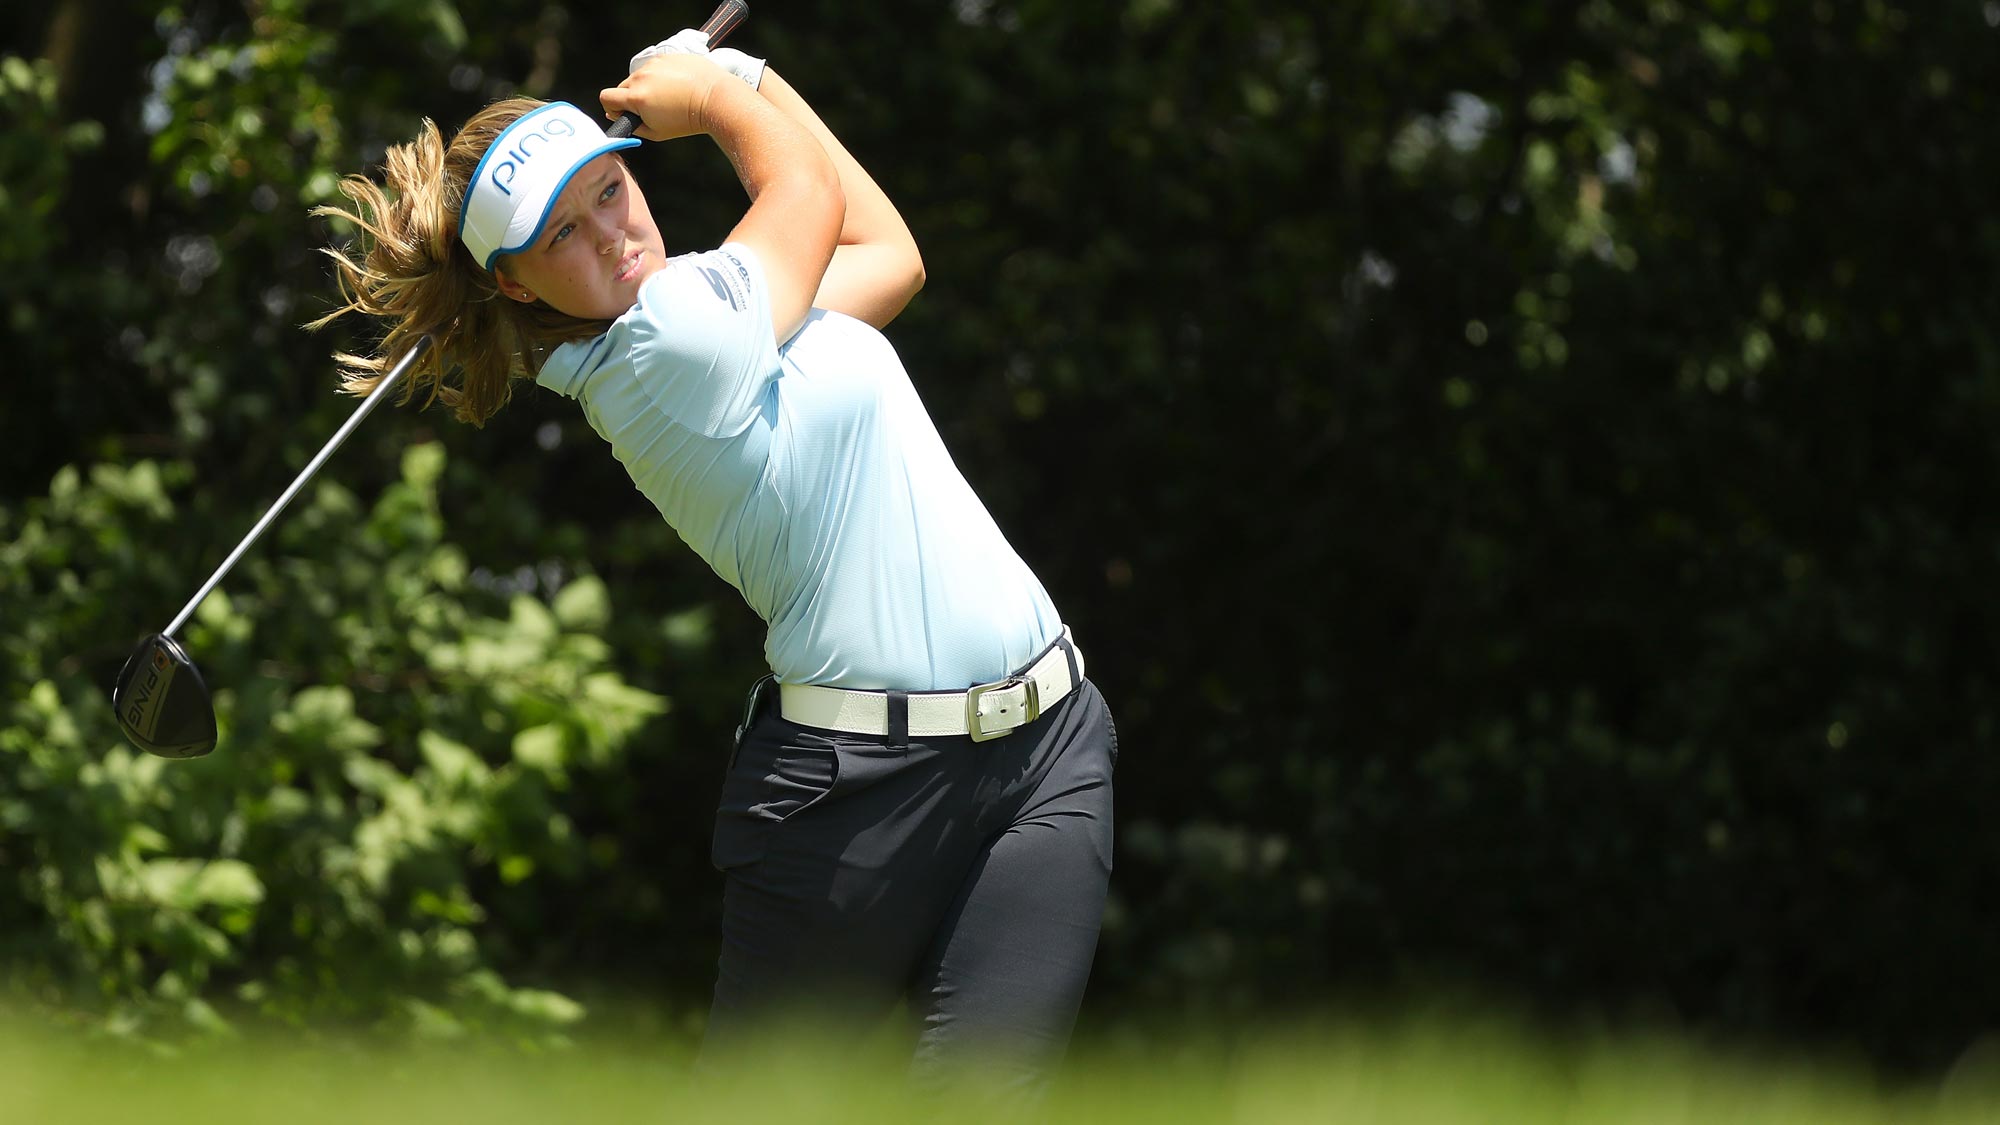 Brooke Henderson watches her drive on the fourth hole during the third round of the 2018 KPMG Women's PGA Championship